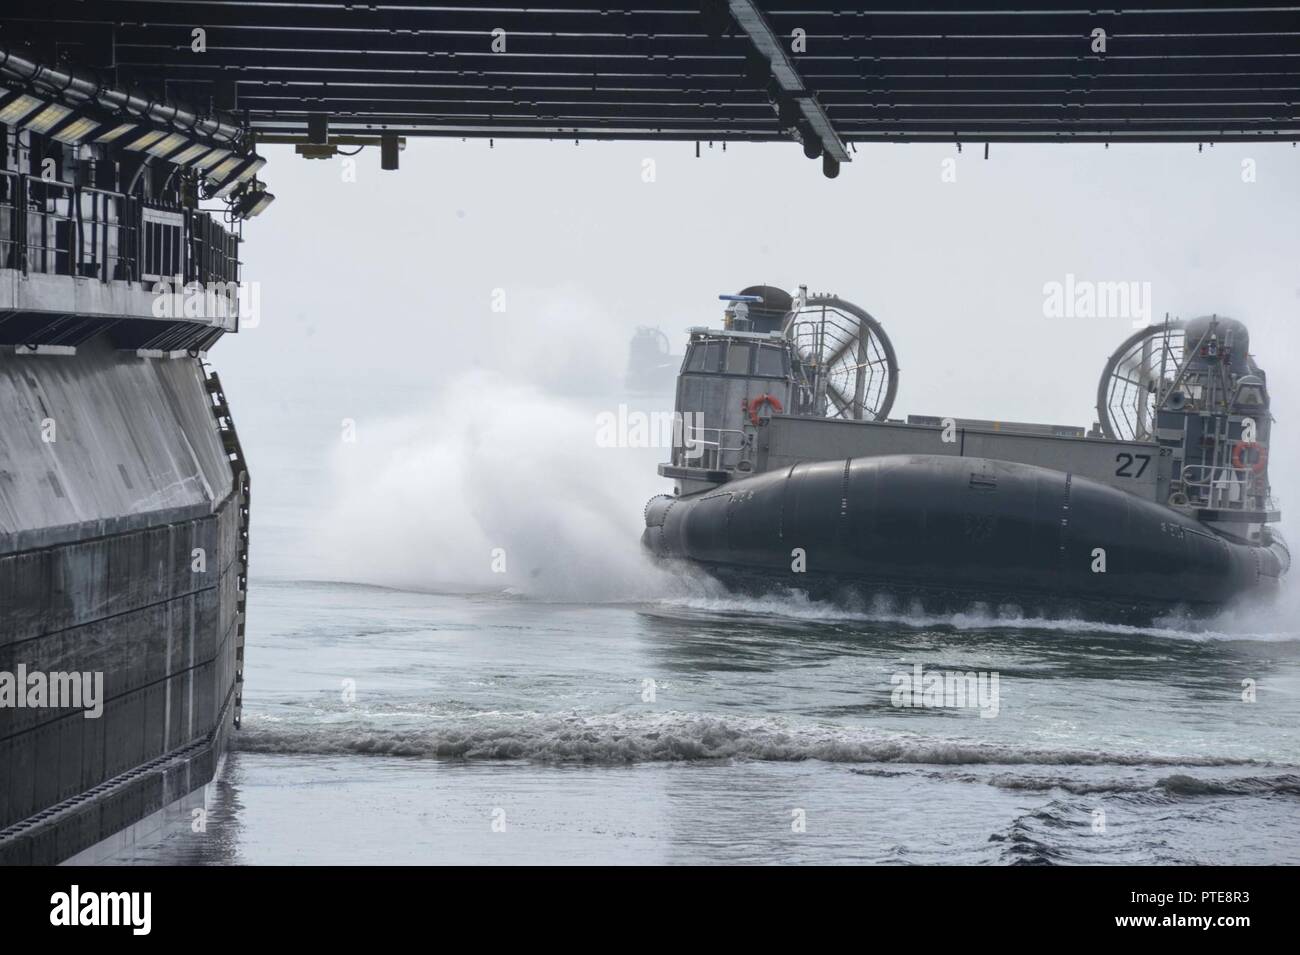 OCEAN (July 15, 2017) Sailors assigned to Assault Craft Unit (ACU) 5 pilot a Landing Craft Air Cushion (LCAC) into the well deck of the Wasp-class amphibious assault ship USS Essex (LHD 2). Essex is underway conducting sea trials off the coast of Southern California. Stock Photo